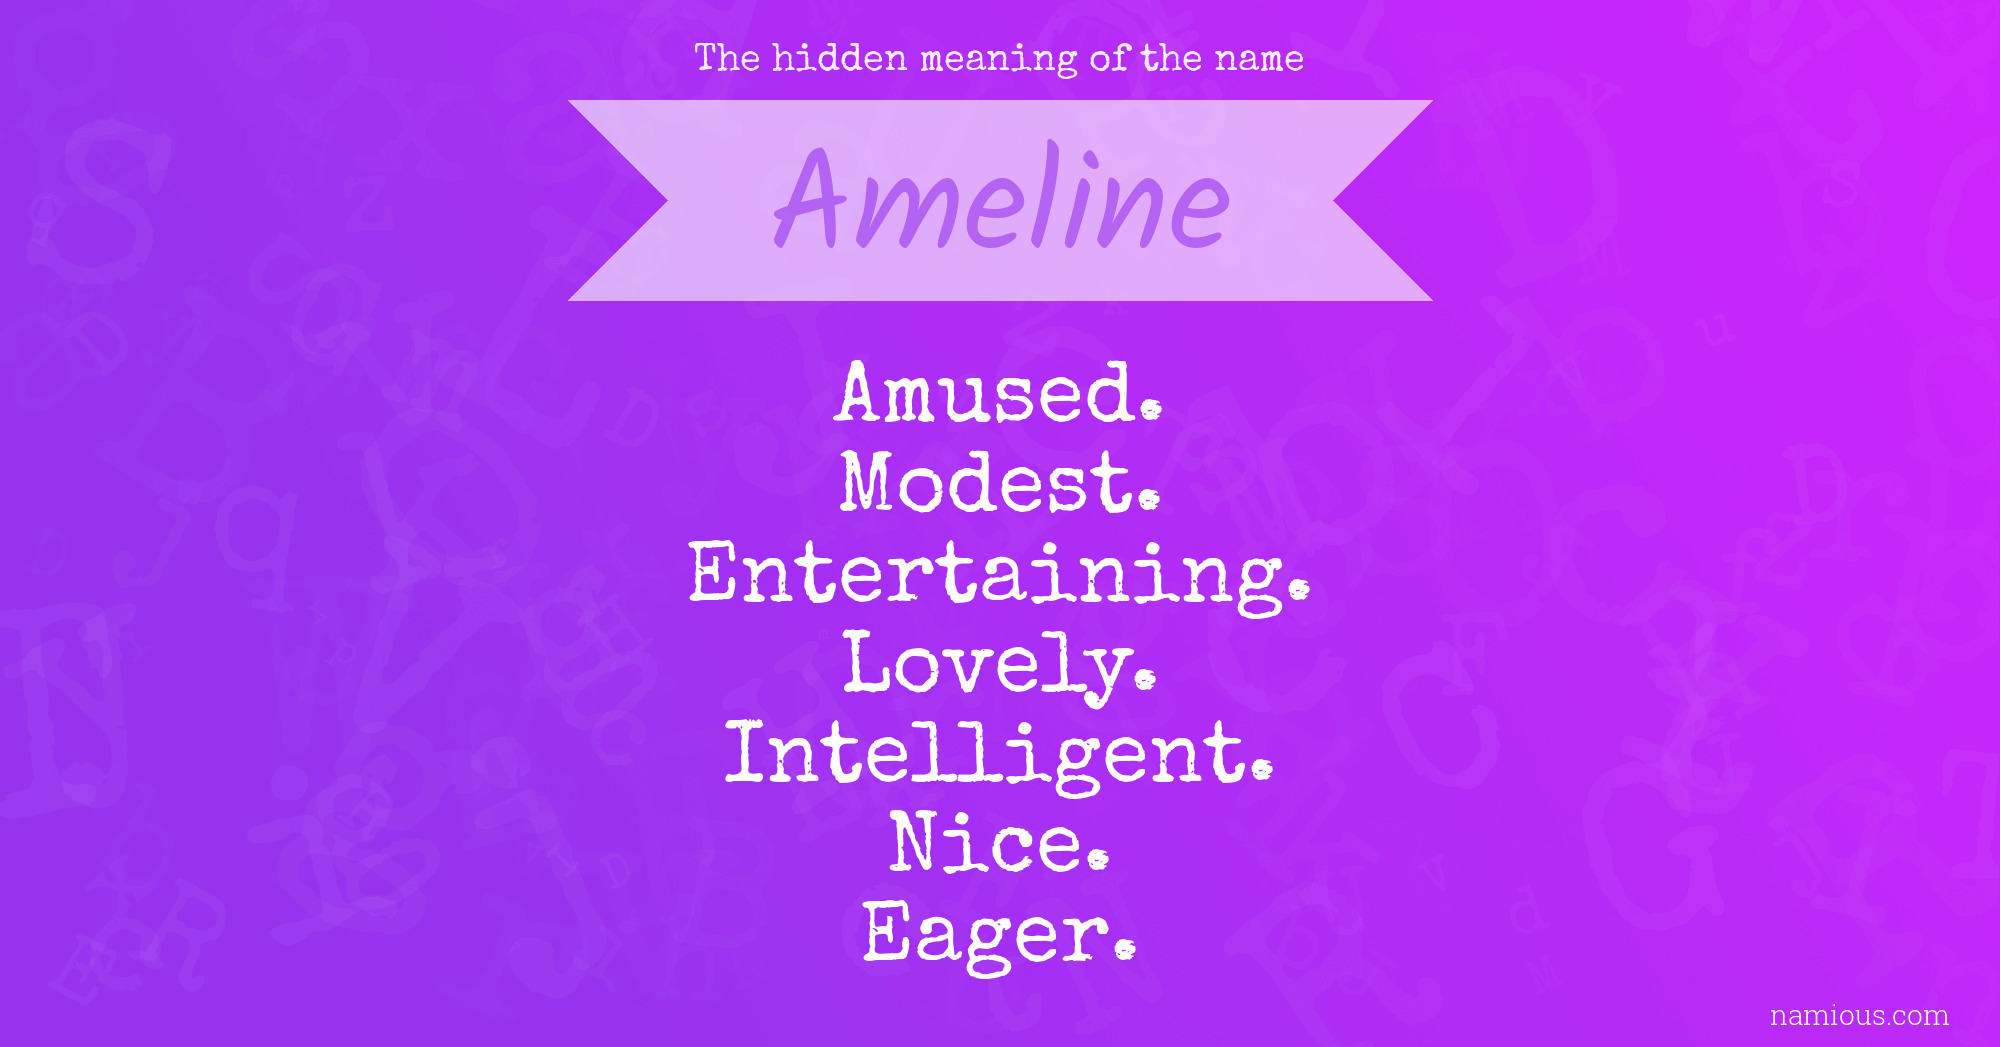 The hidden meaning of the name Ameline